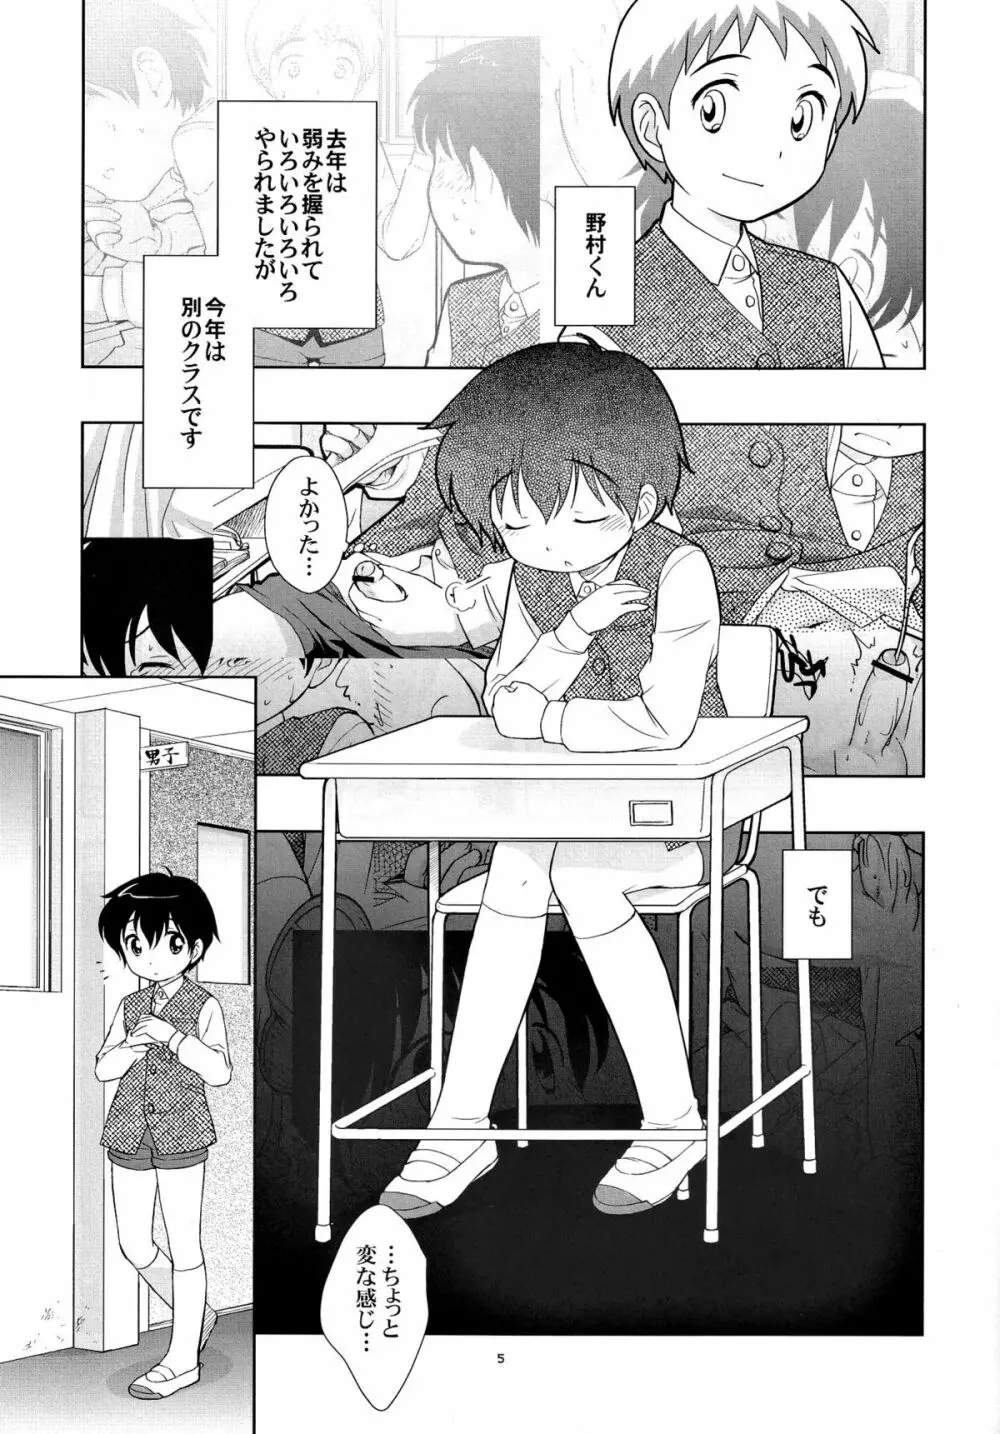 the Slave driver at school Again 2年目もあそぼ! Page.4